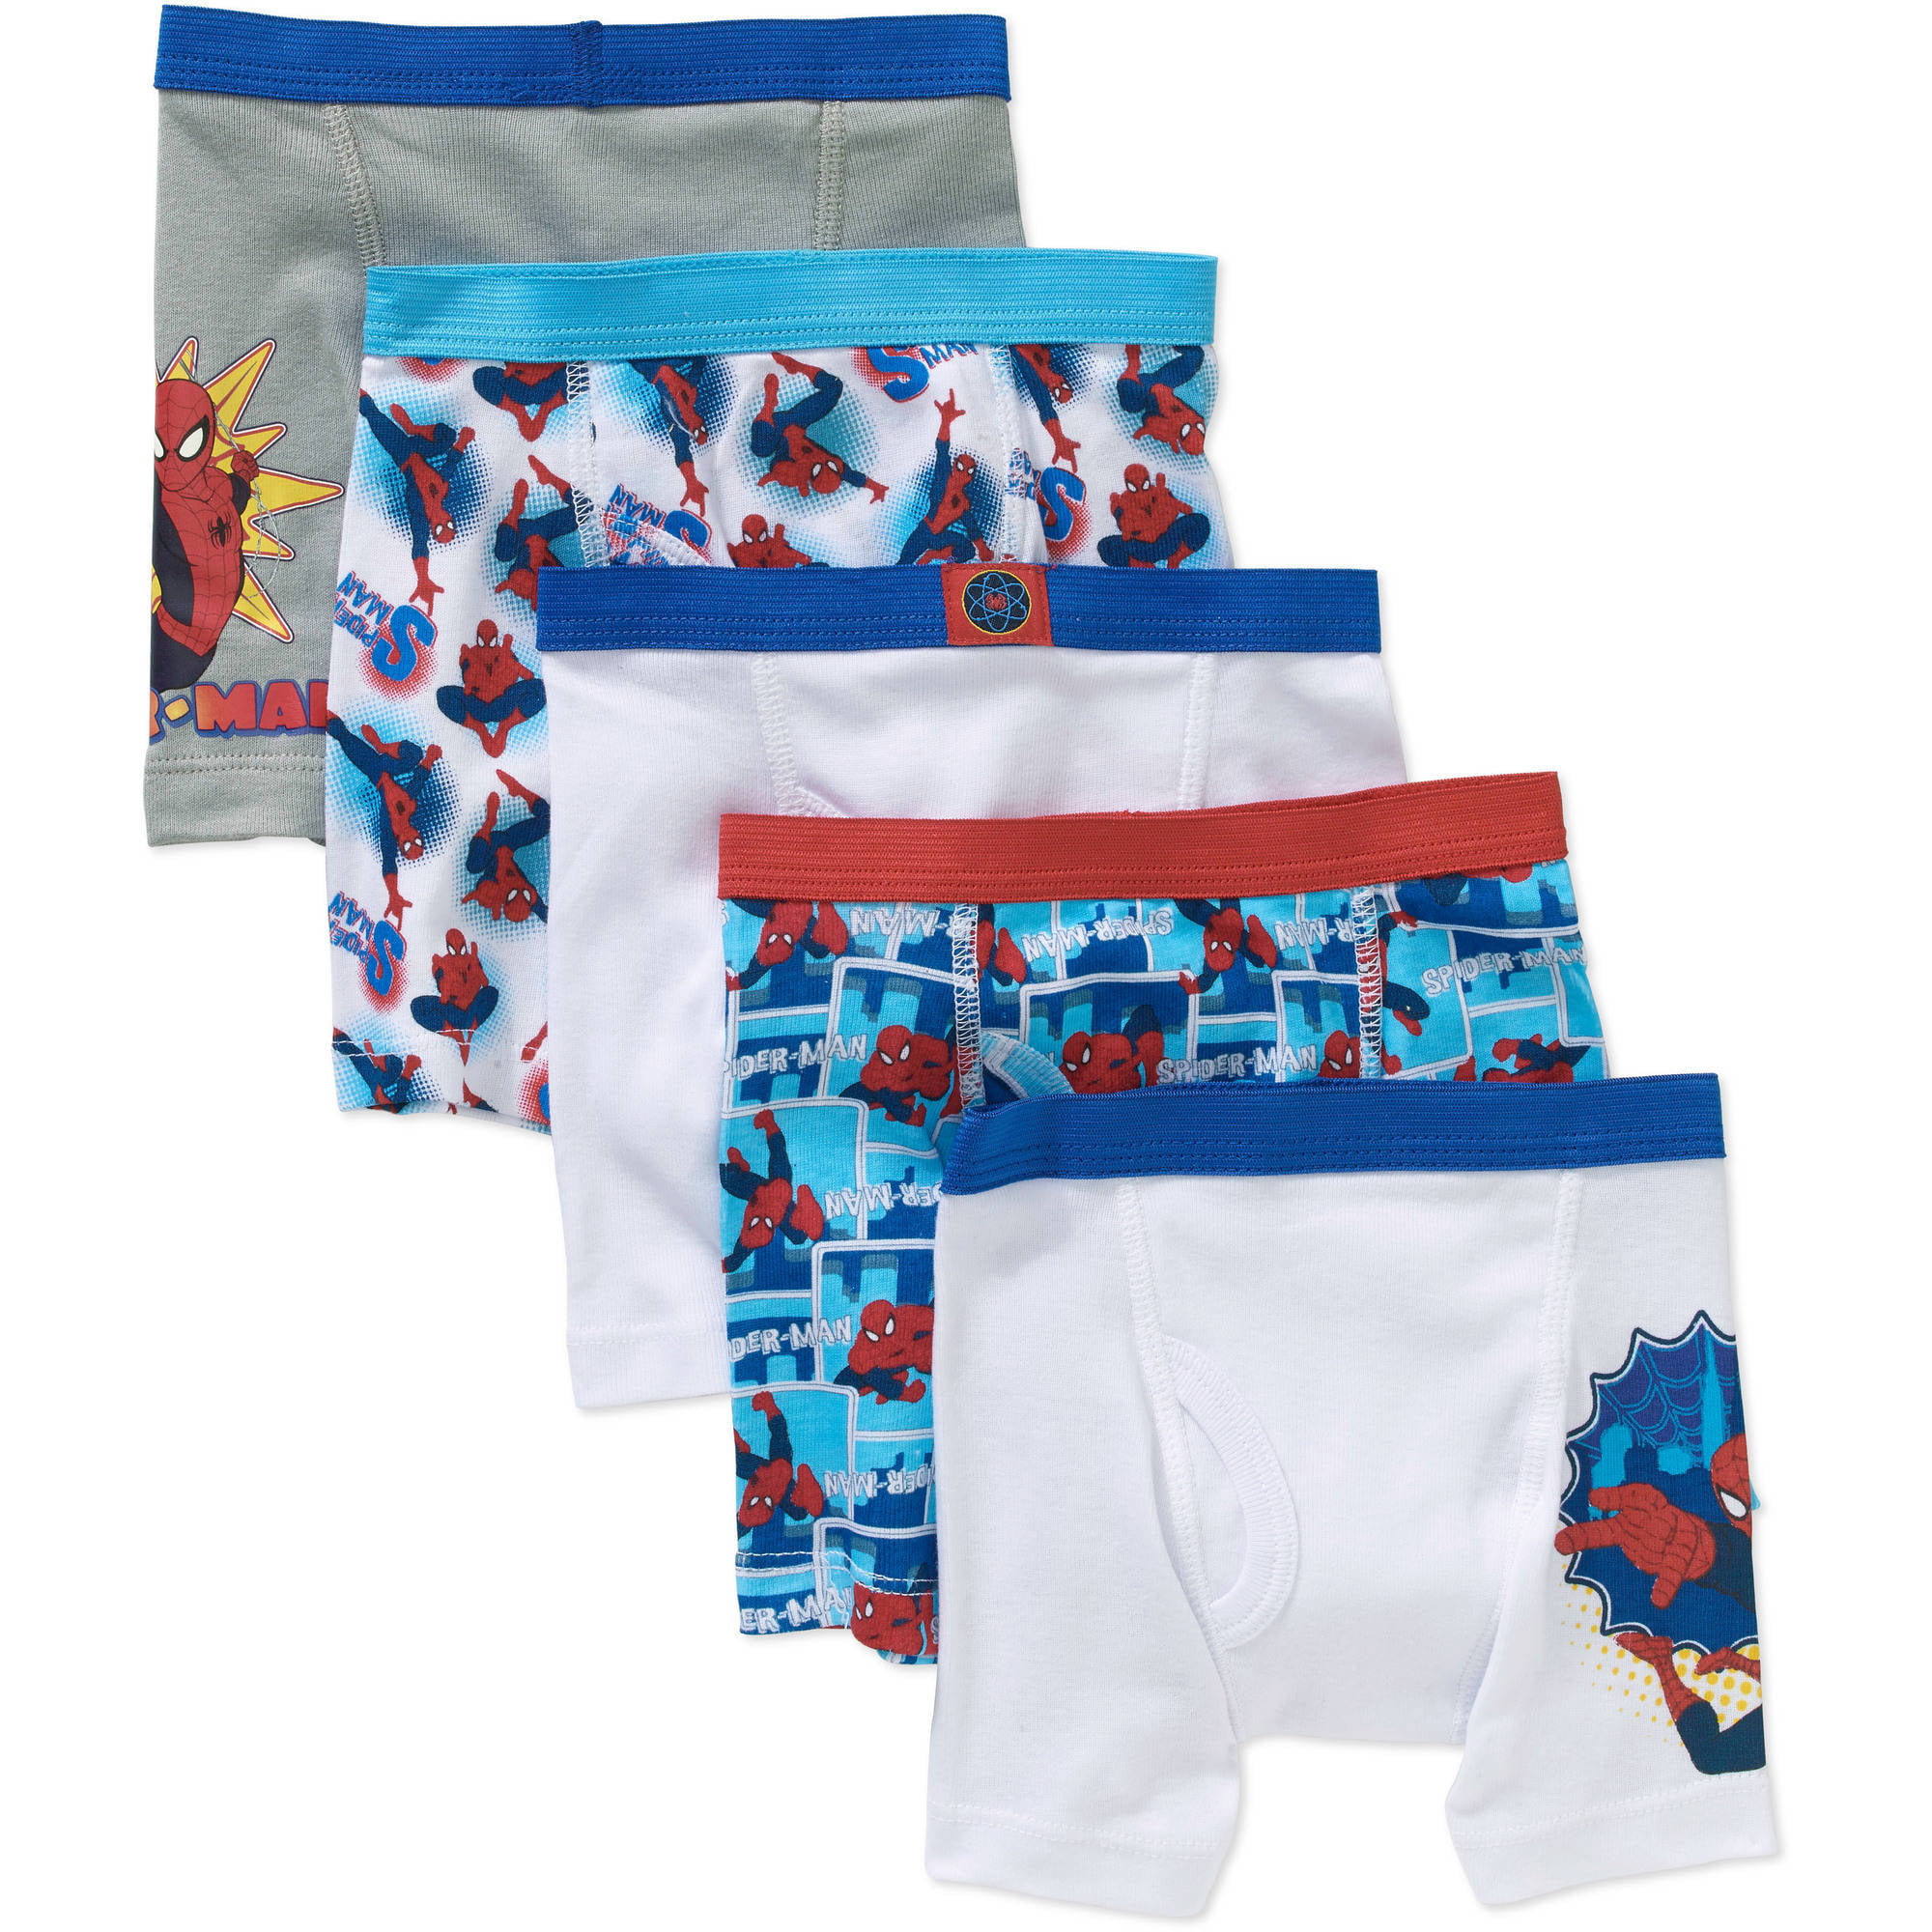 Boys Spiderman Trunk 2 in A Pack Kids Spiderman Boxer Shorts Trunk Age 2-8 Years 